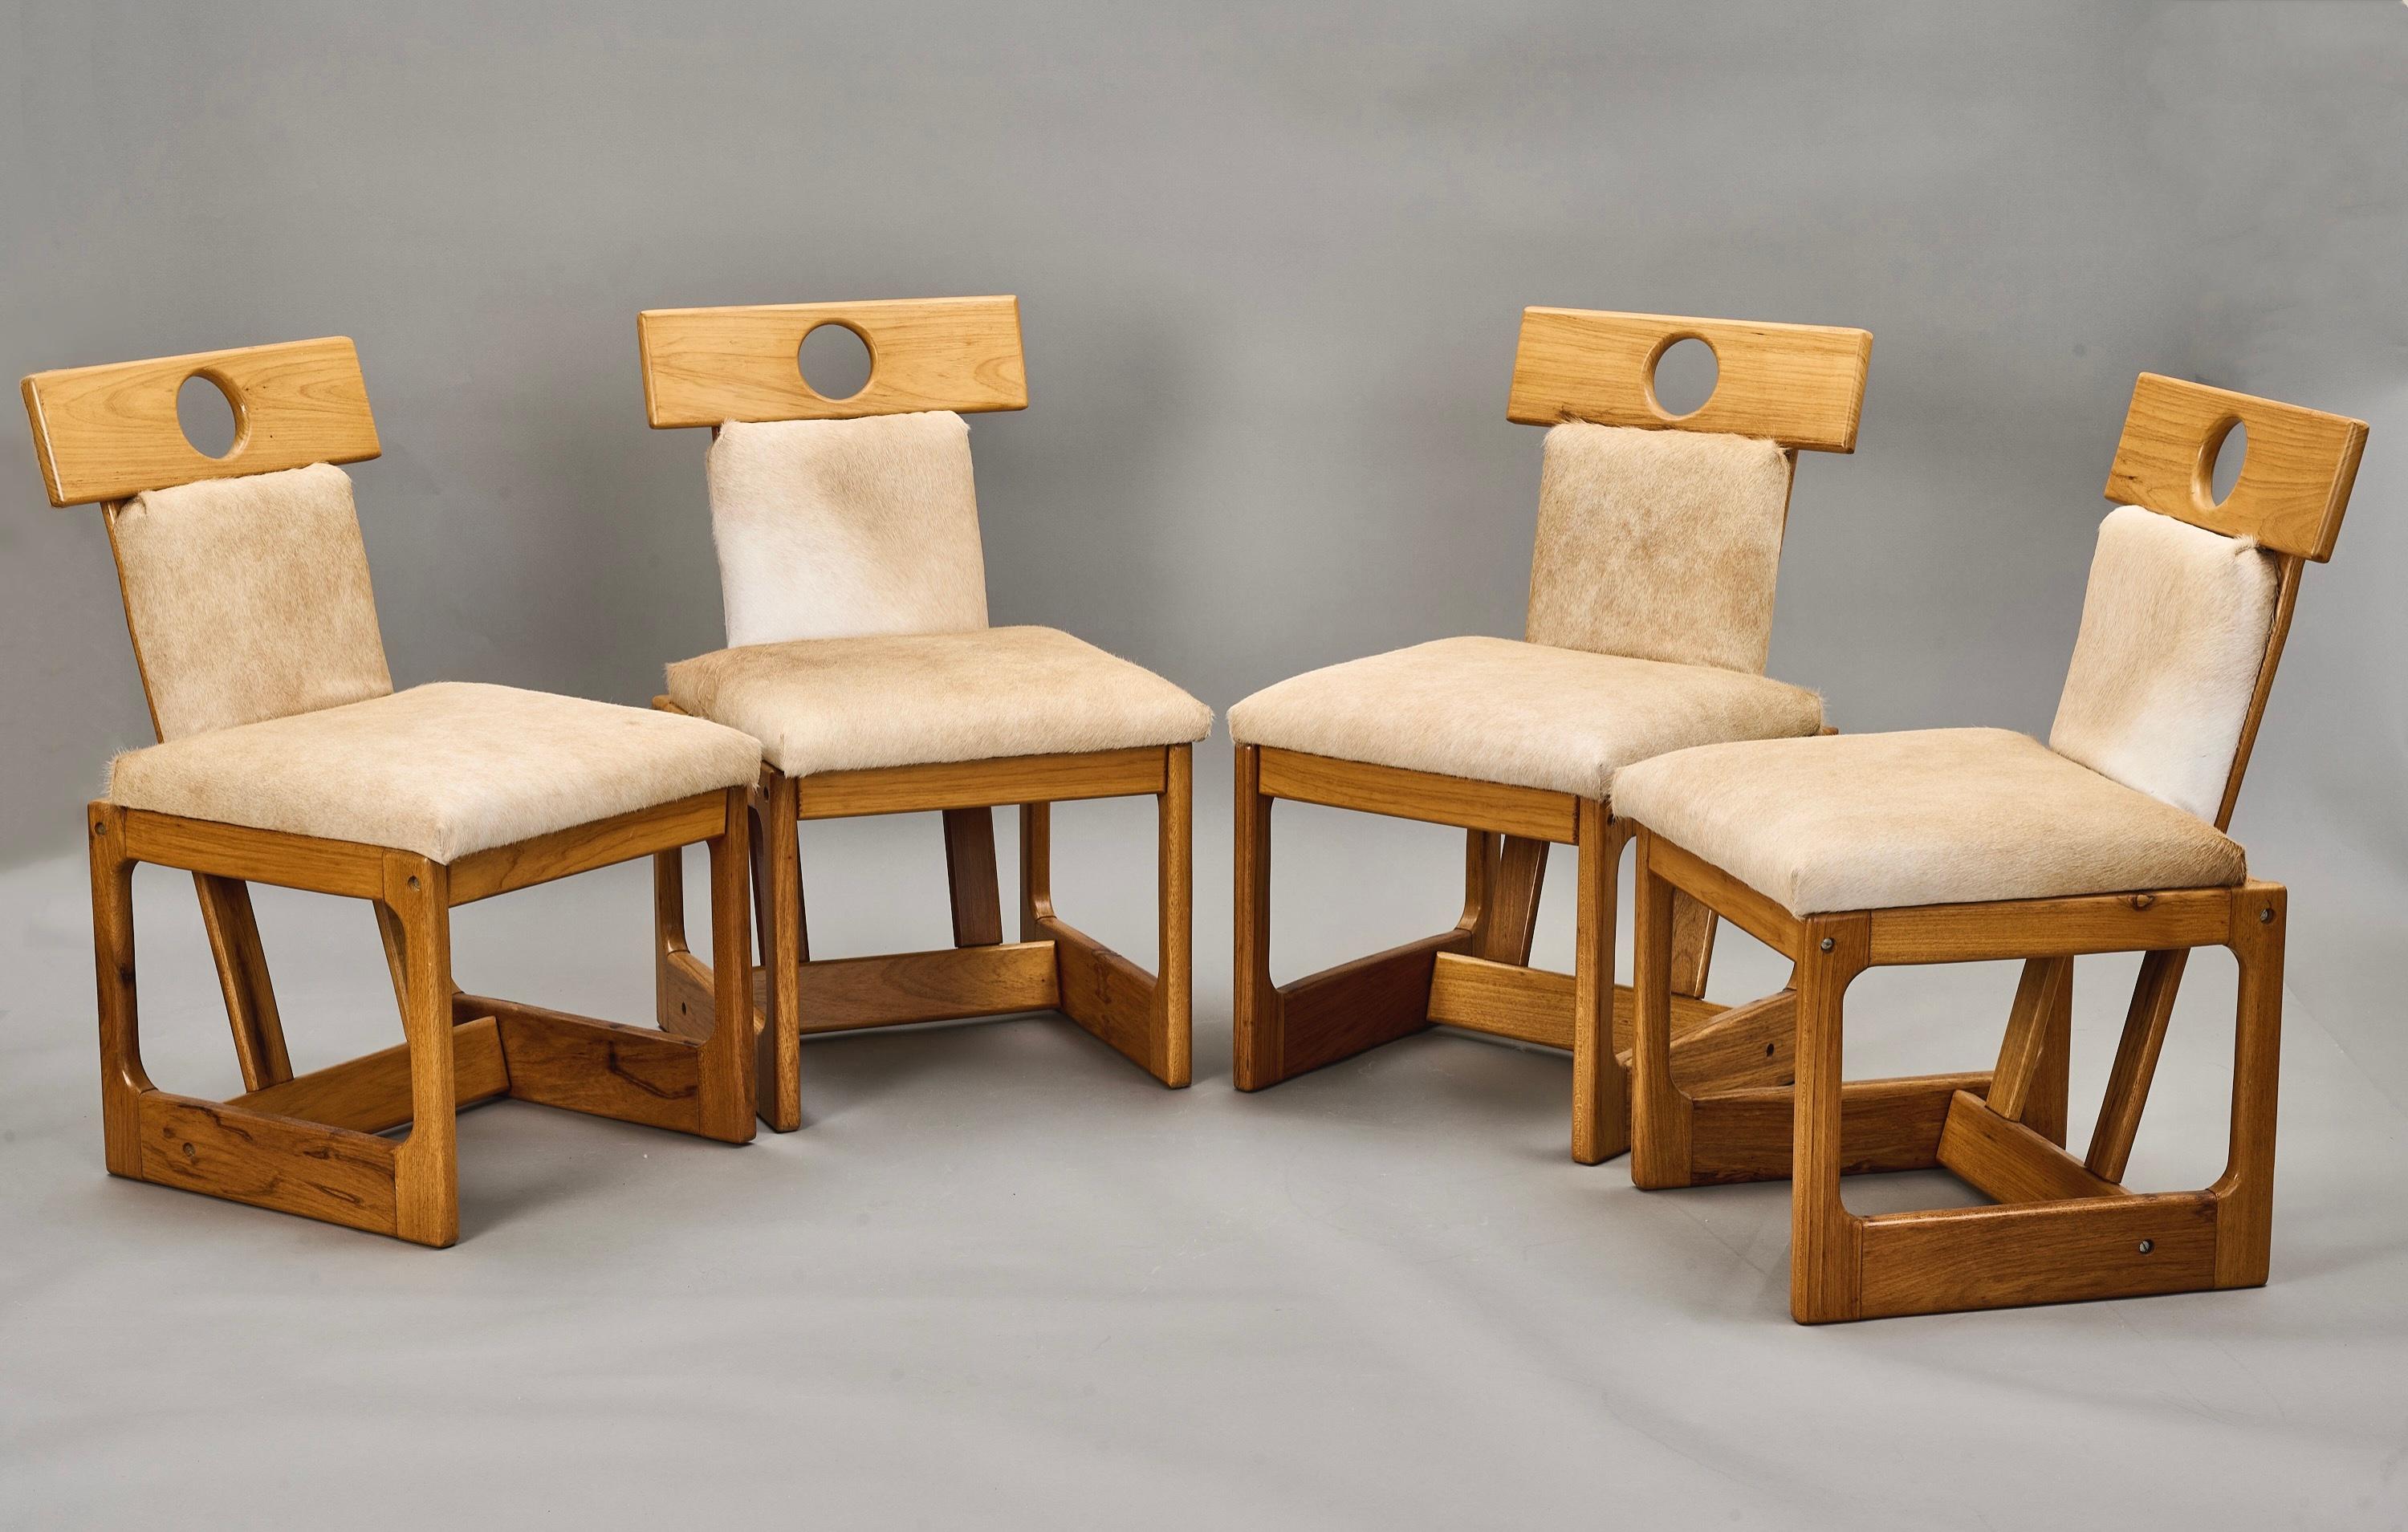 Sergio Rodrigues (1927–2014)

A set of four Cuiaba dining chairs by Brazilian design pioneer Sergio Rodrigues, in caviona wood upholstered in cream-colored cowhide. The chairs' geometric form rests on a pair of rectangular legs, the construction and